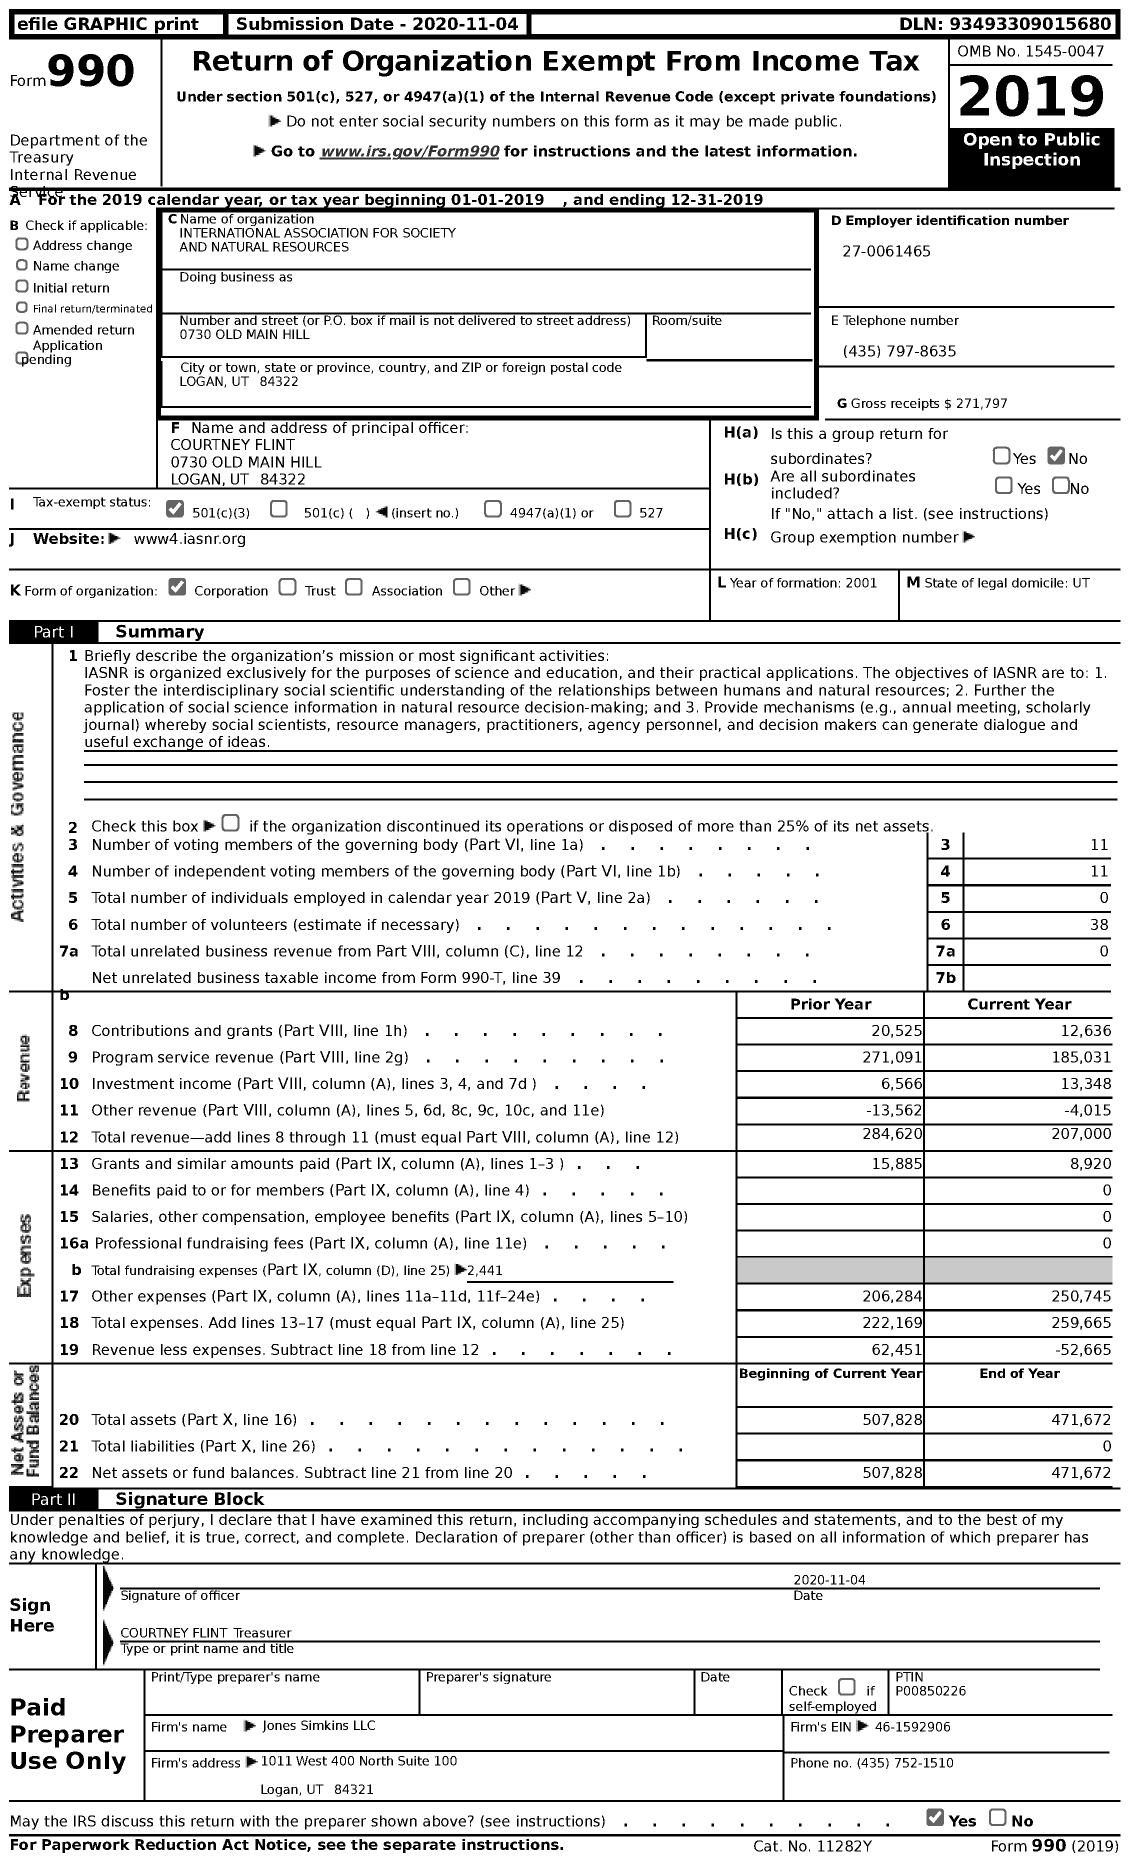 Image of first page of 2019 Form 990 for International Association for Society and Natural Resources